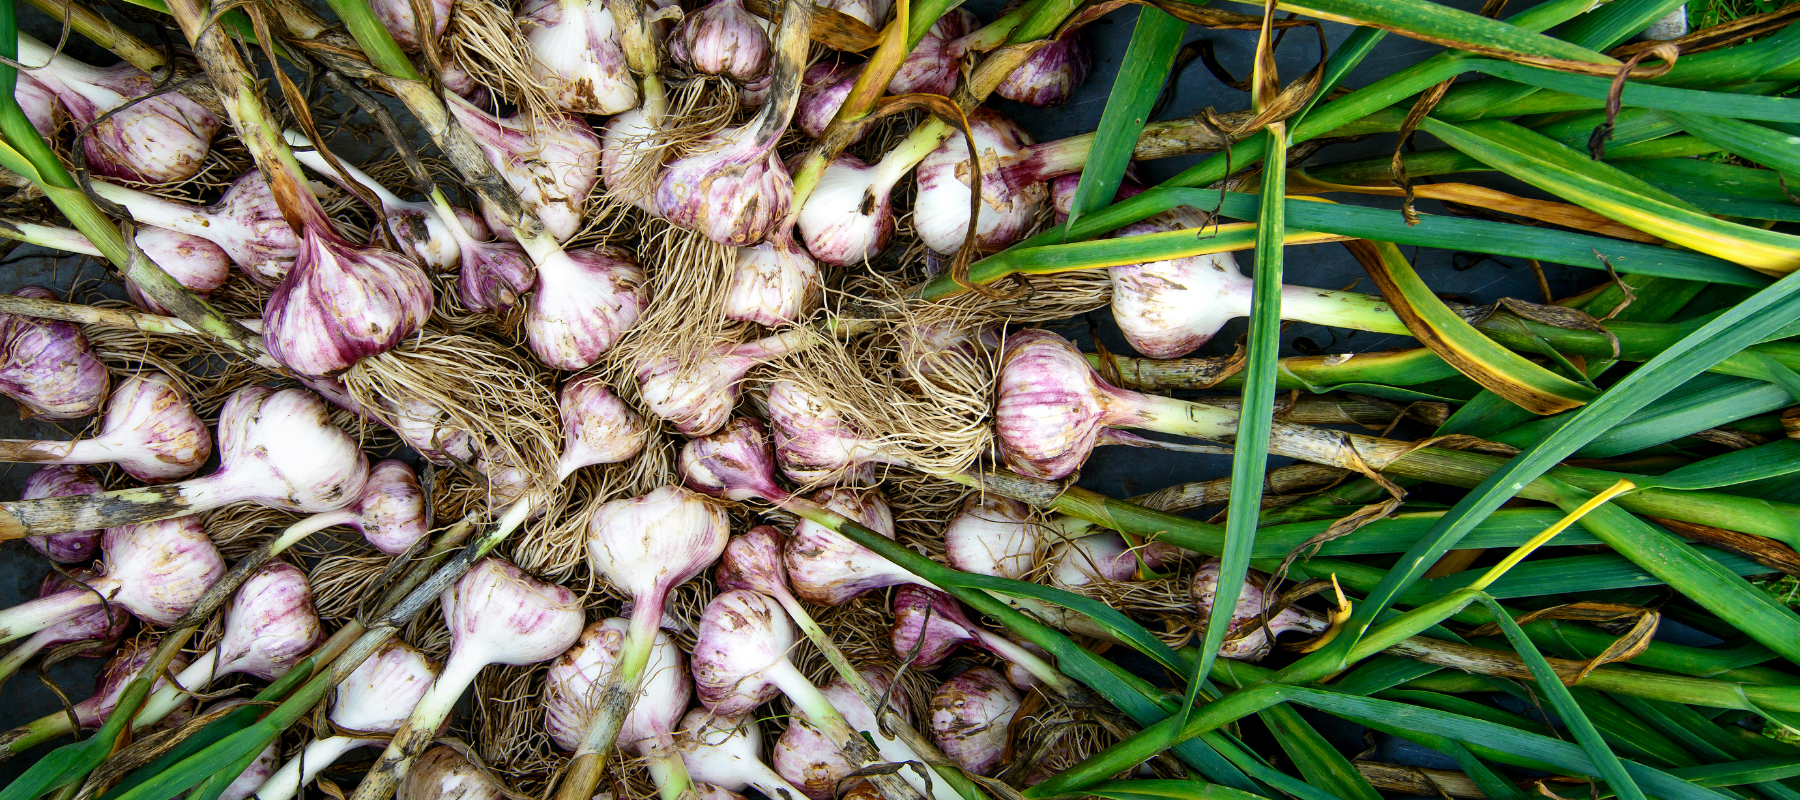 5 easy steps to growing garlic